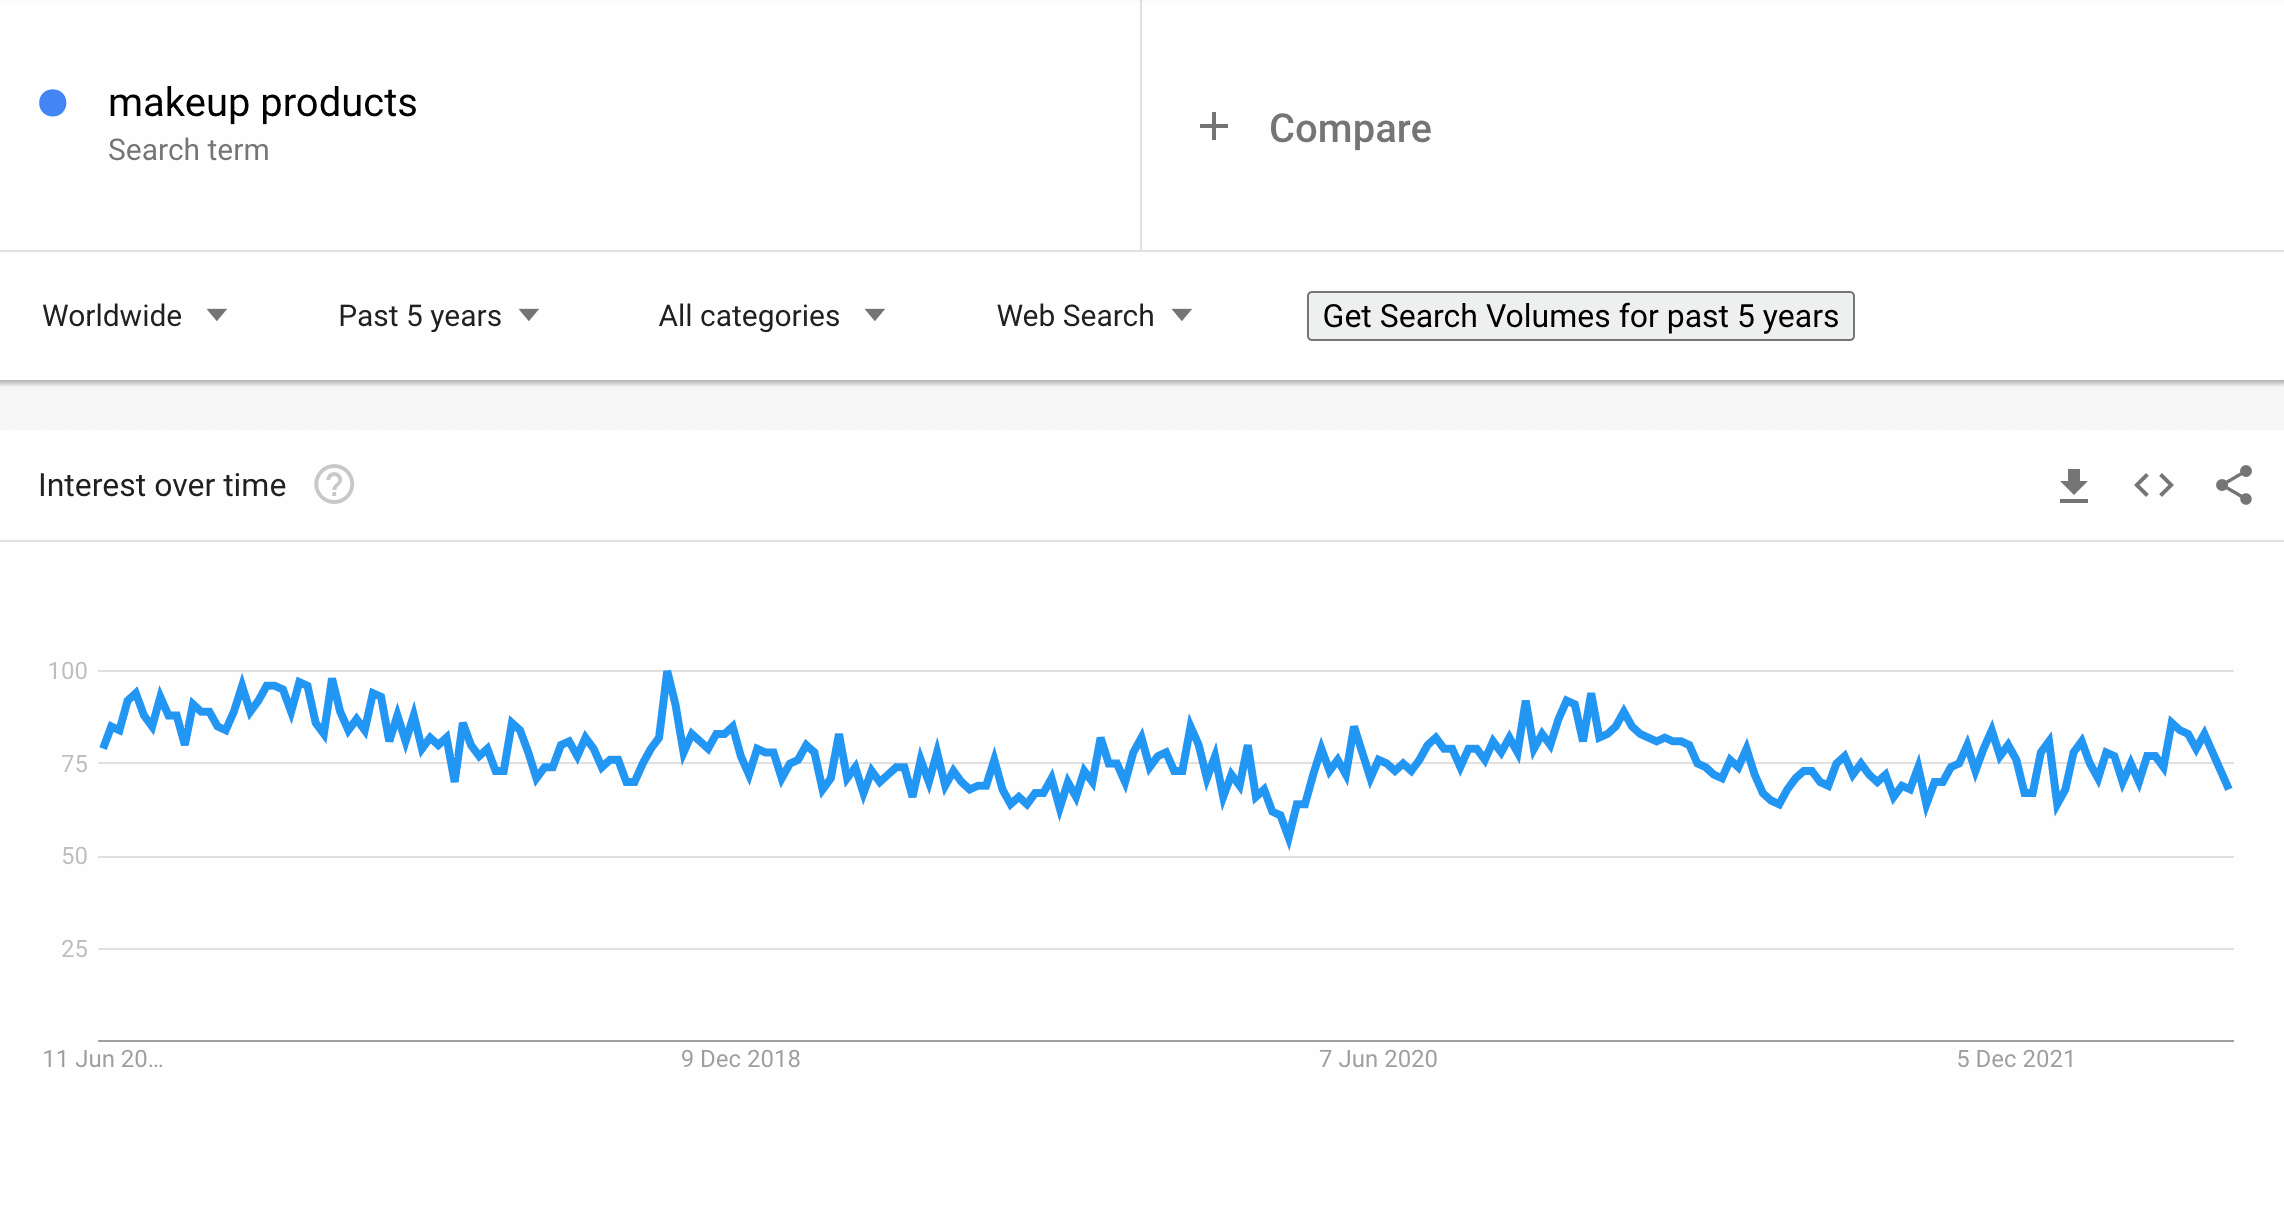 Makeup products according to Google Trends